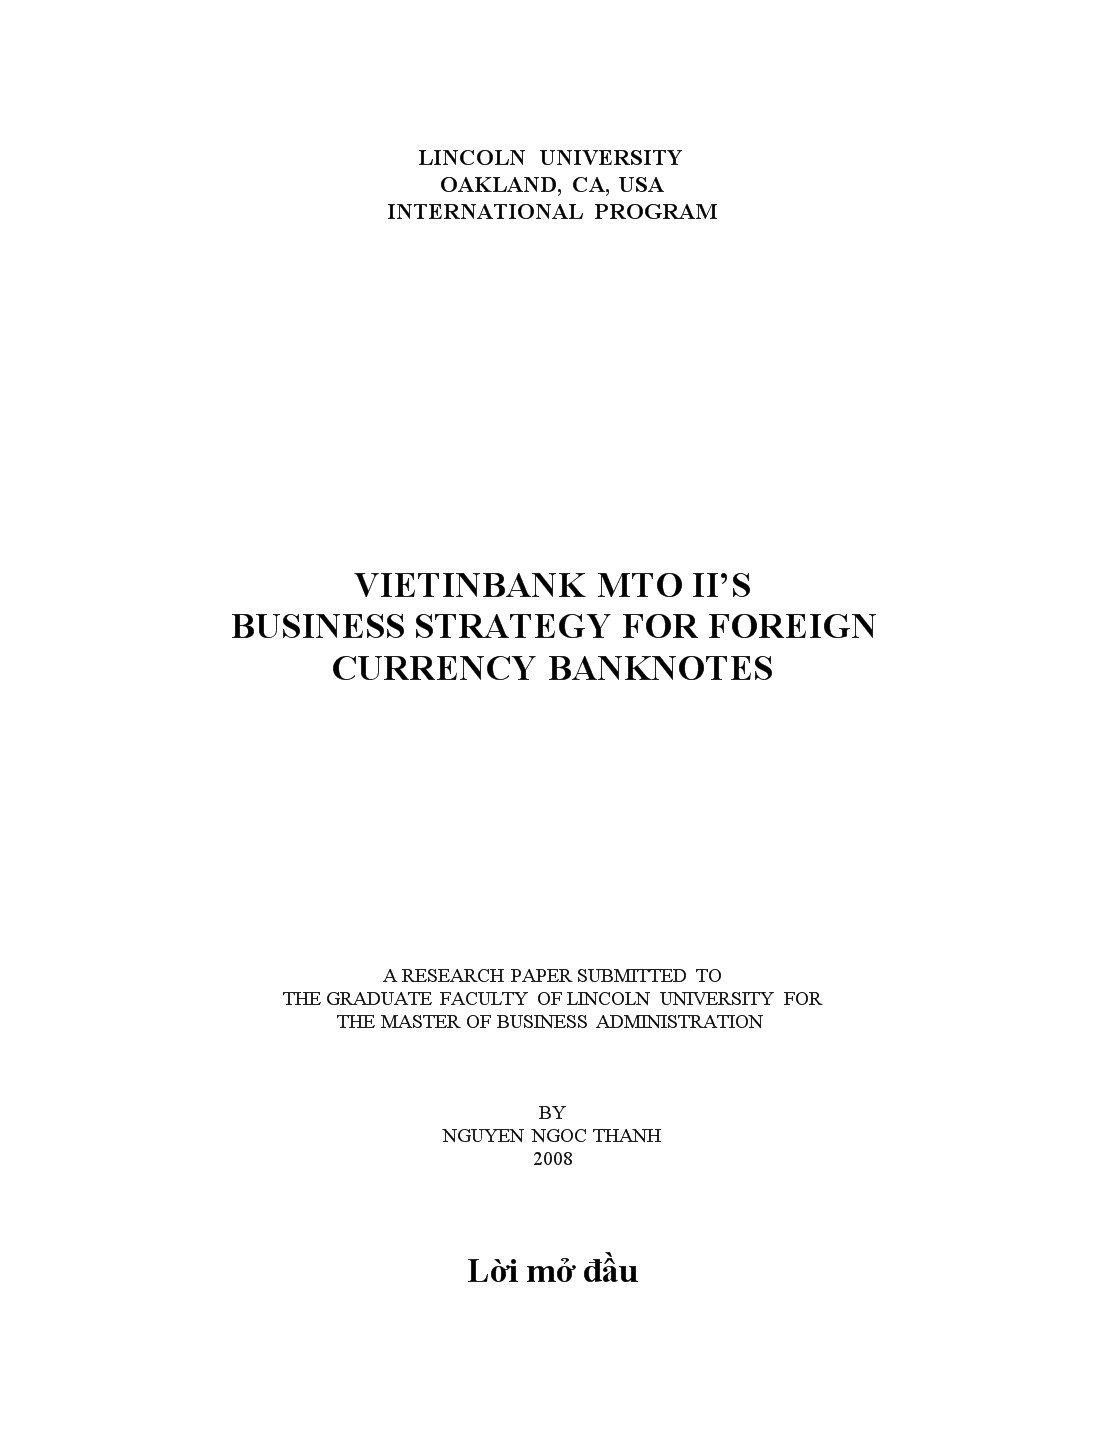 Vietinbank mto ii’s business strategy for foreign currency banknotes trang 1